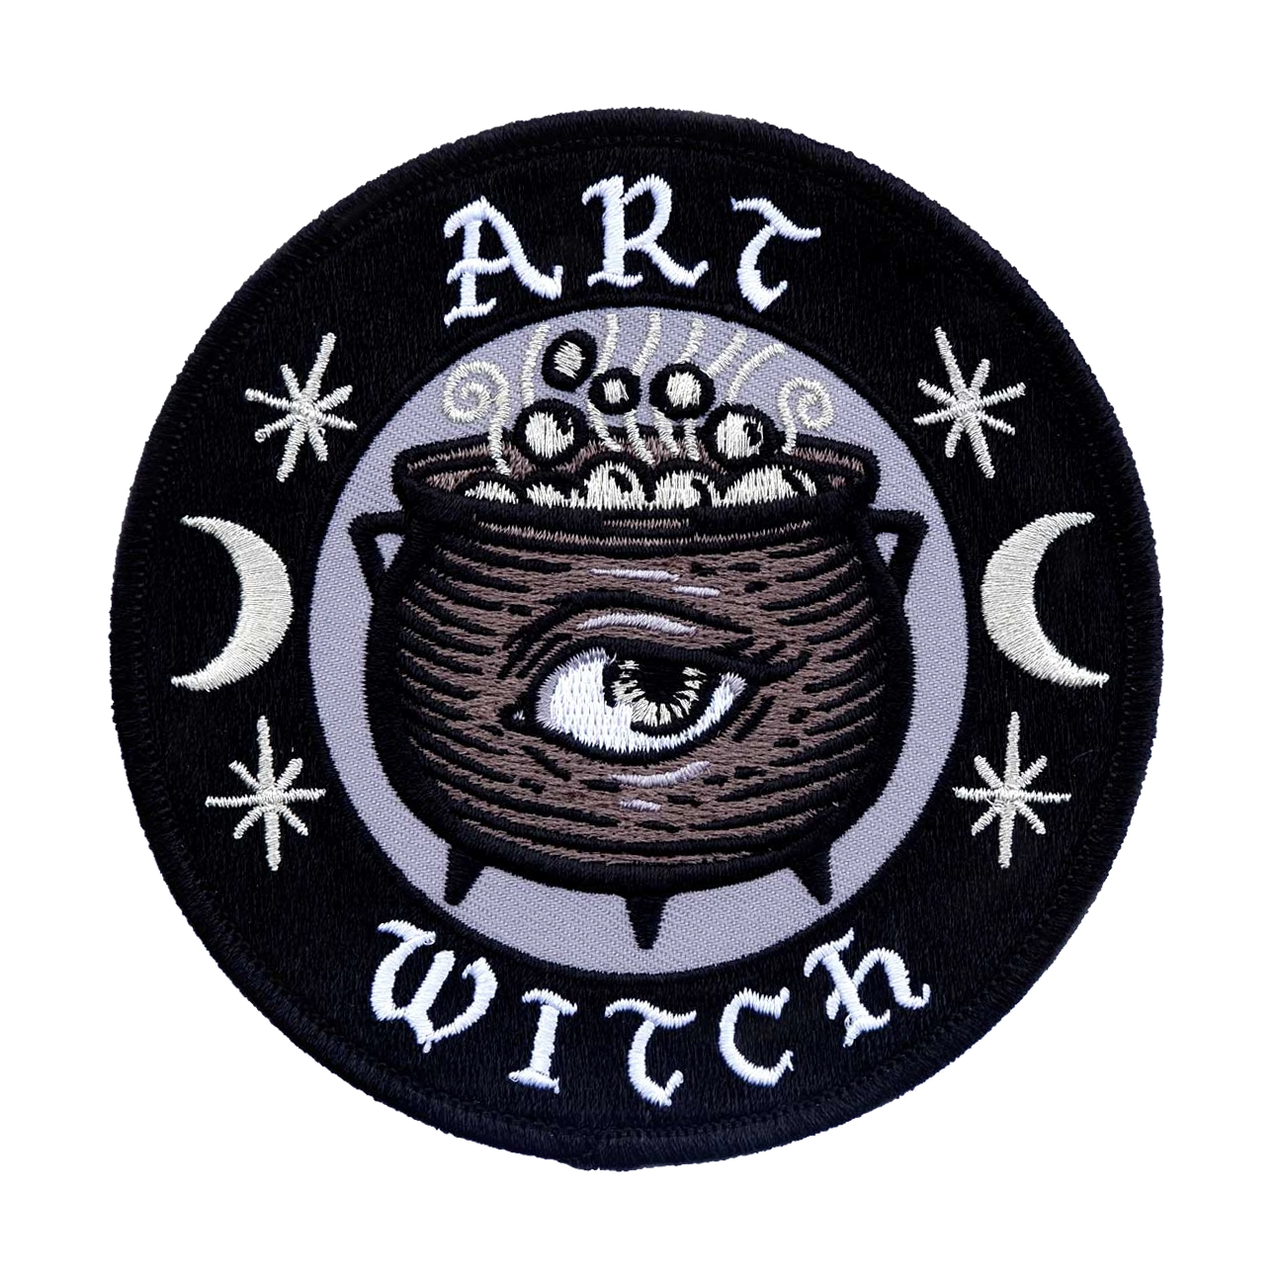 CAT COVEN ART WITCH EMBROIDERED PATCH